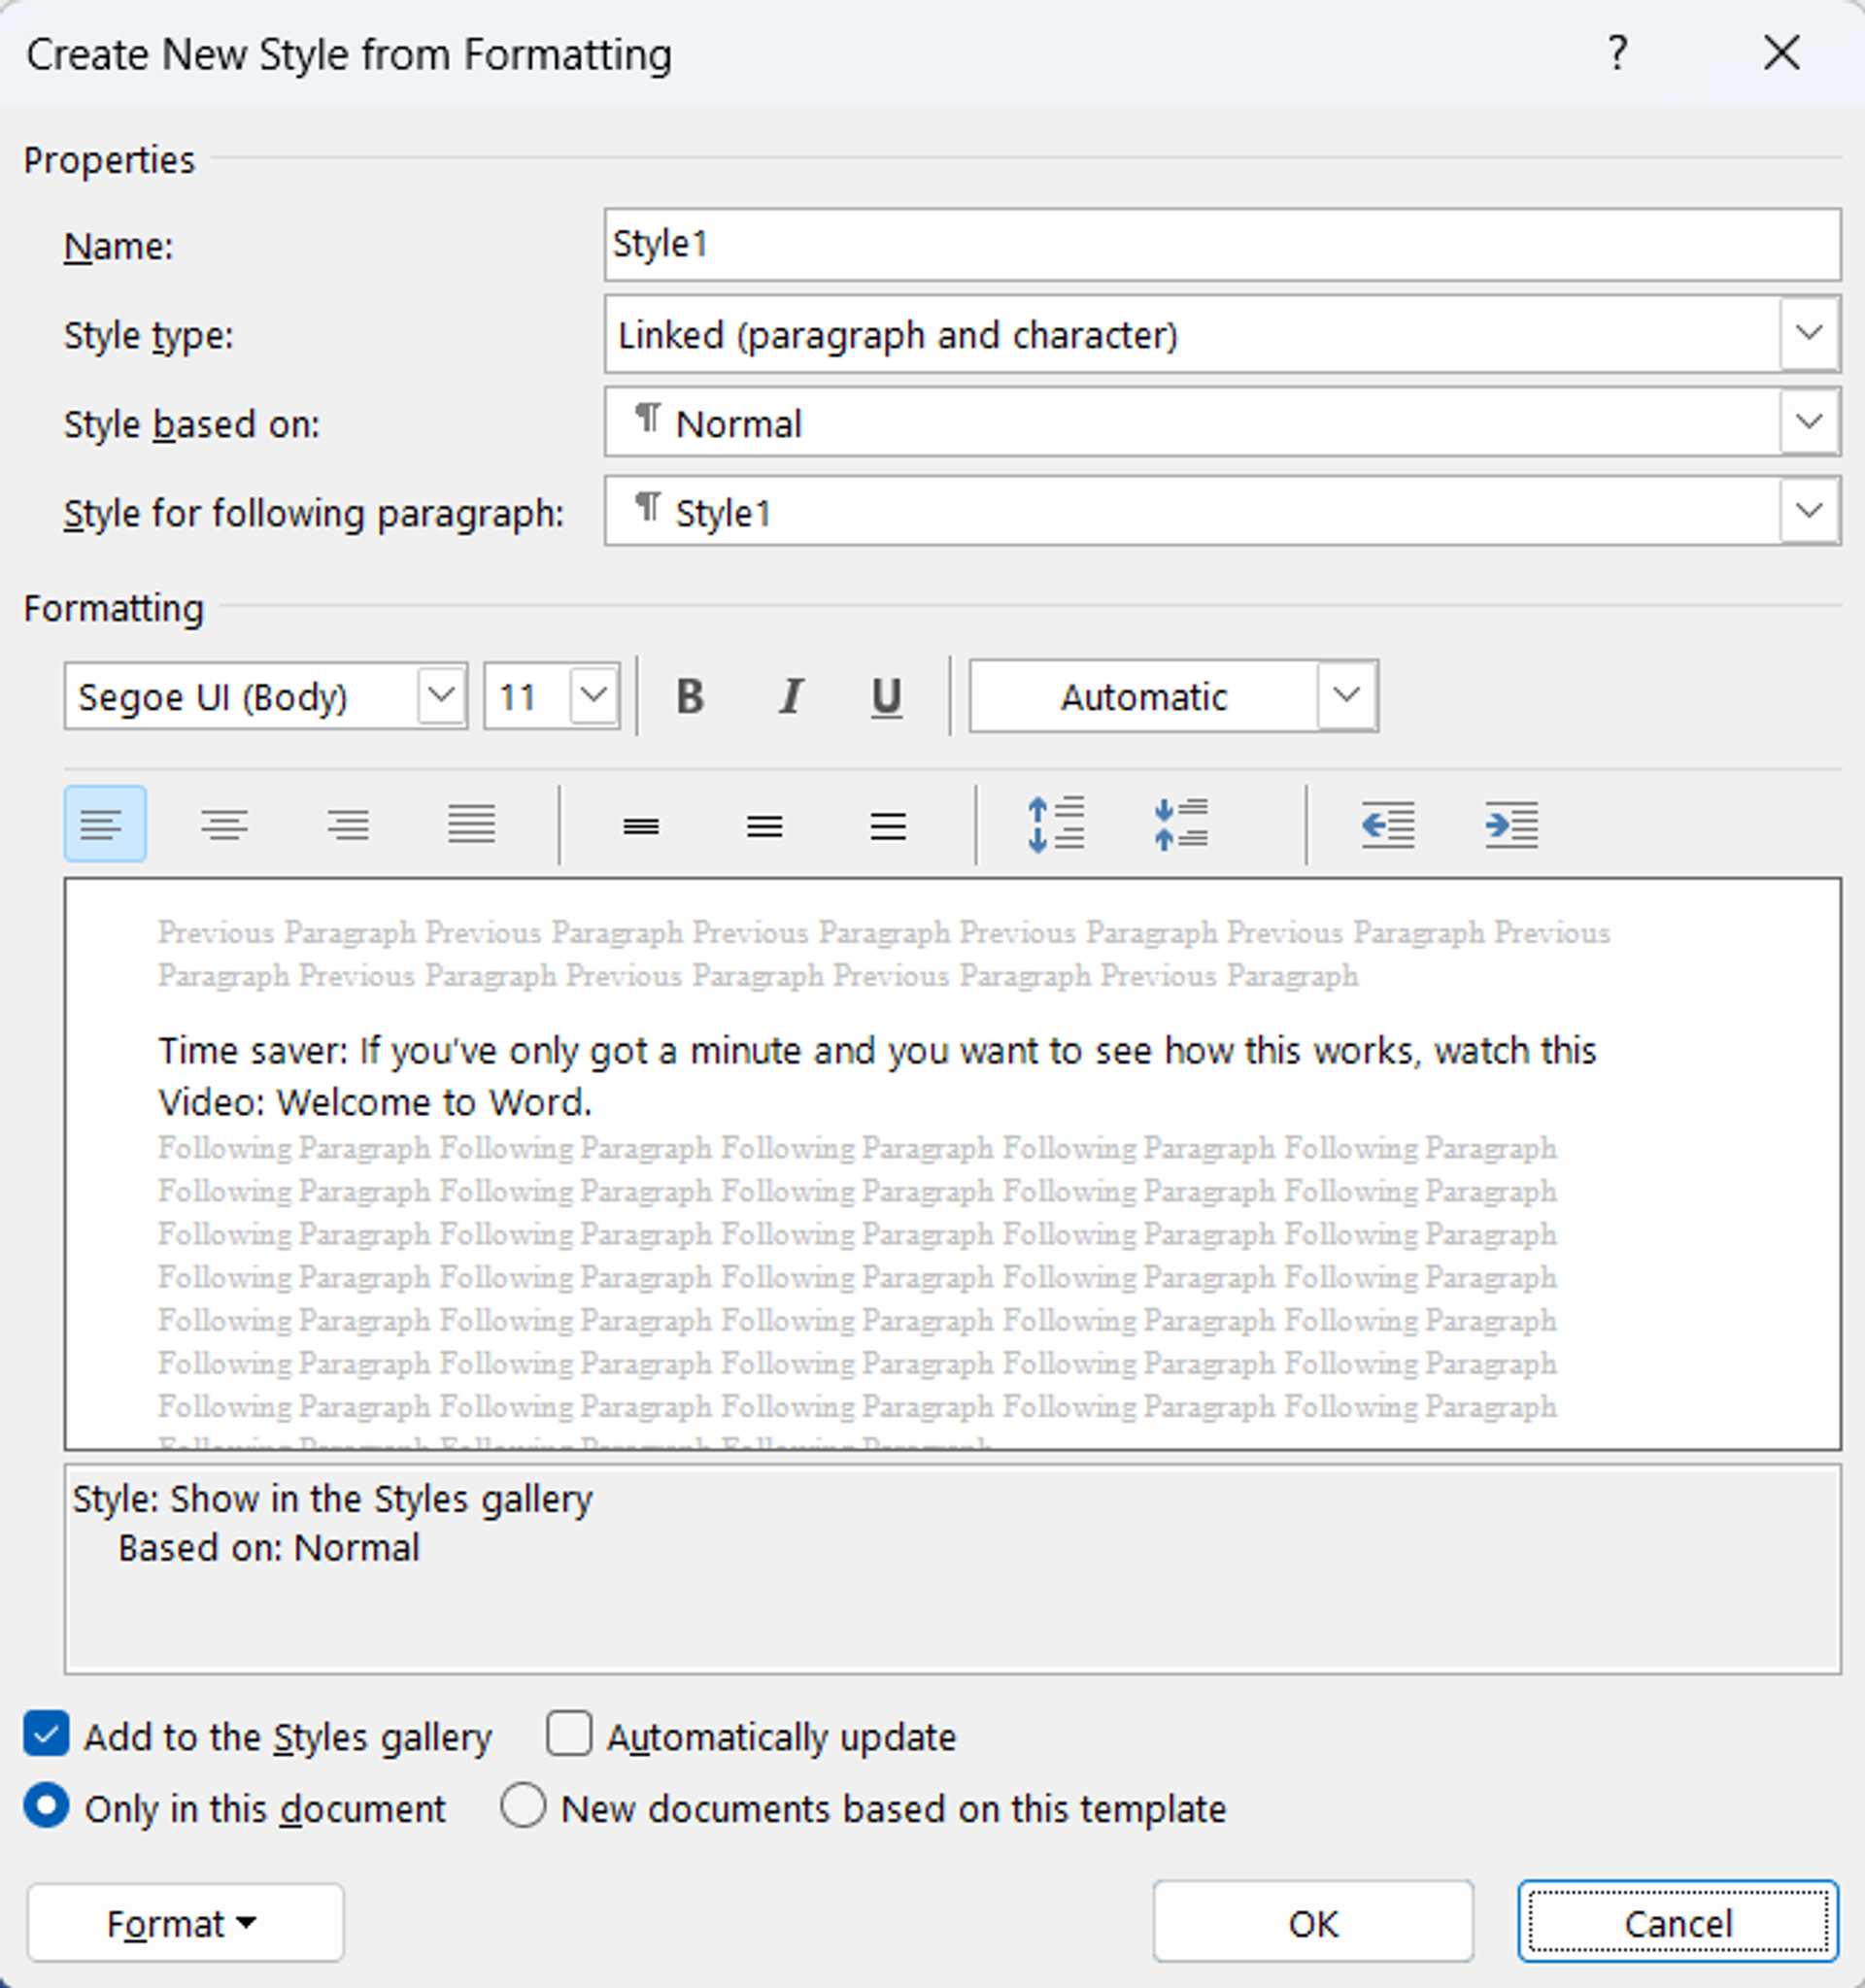 Options for creating a new style from formatting in MS Word 